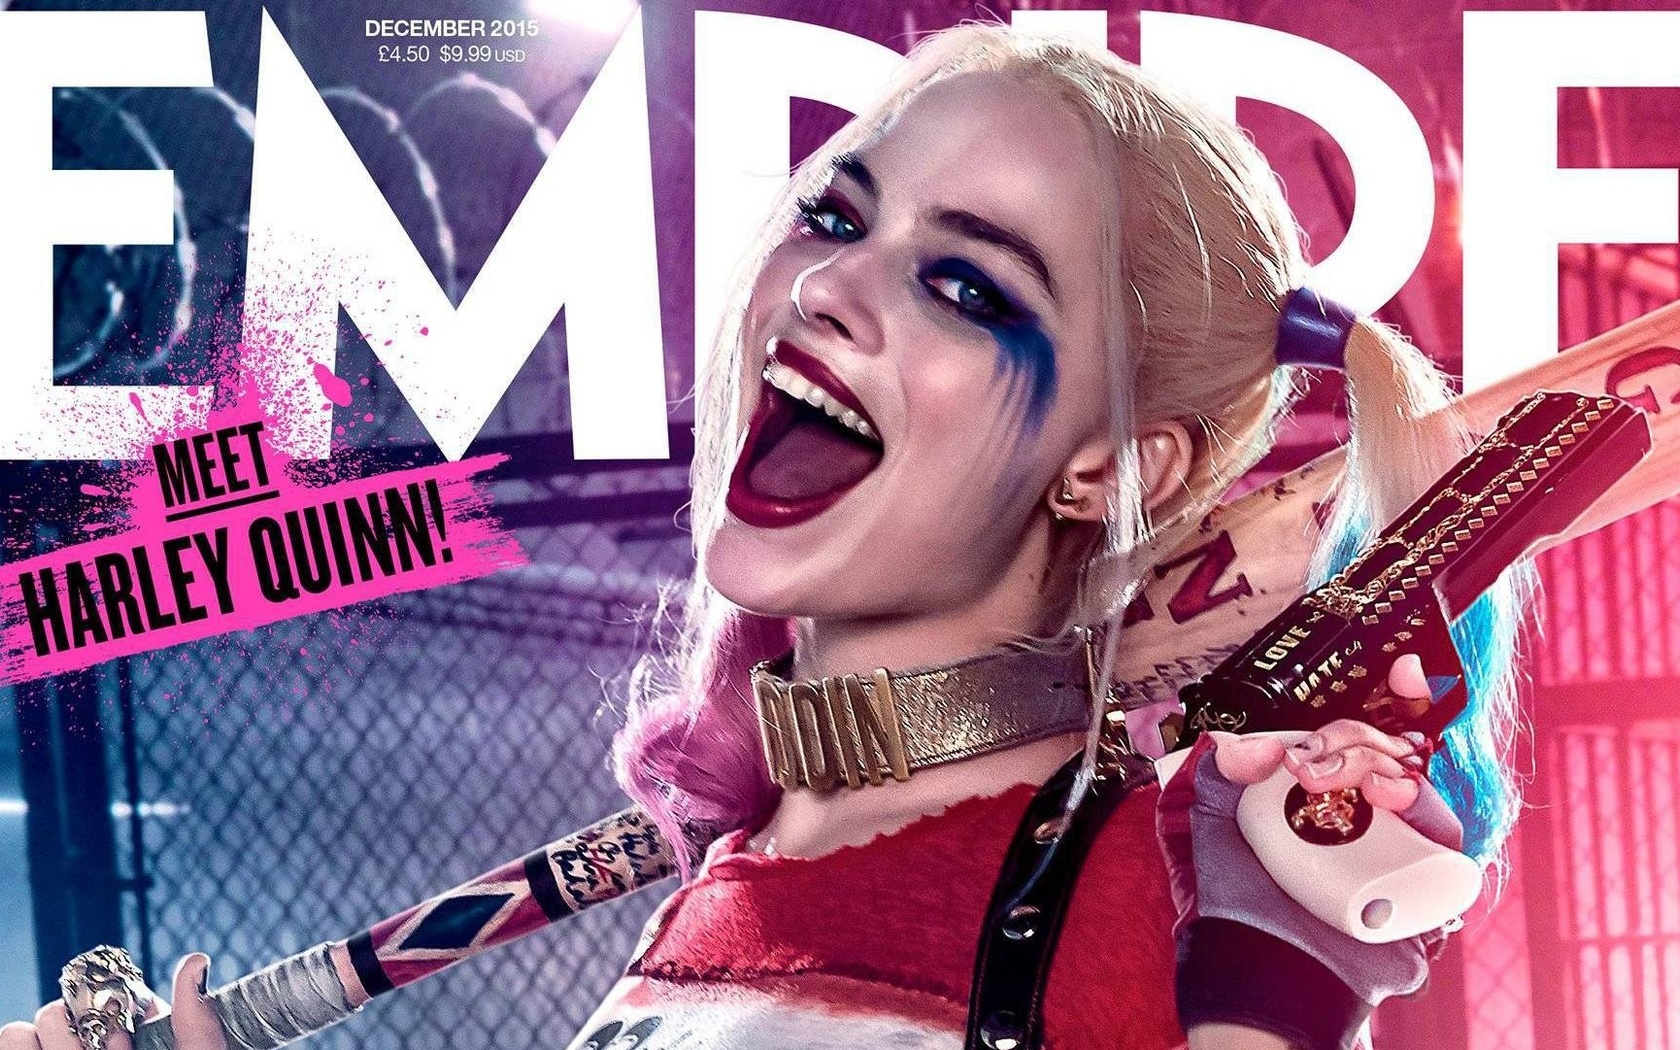  , suicide squad,  , harley quinn, , ,  